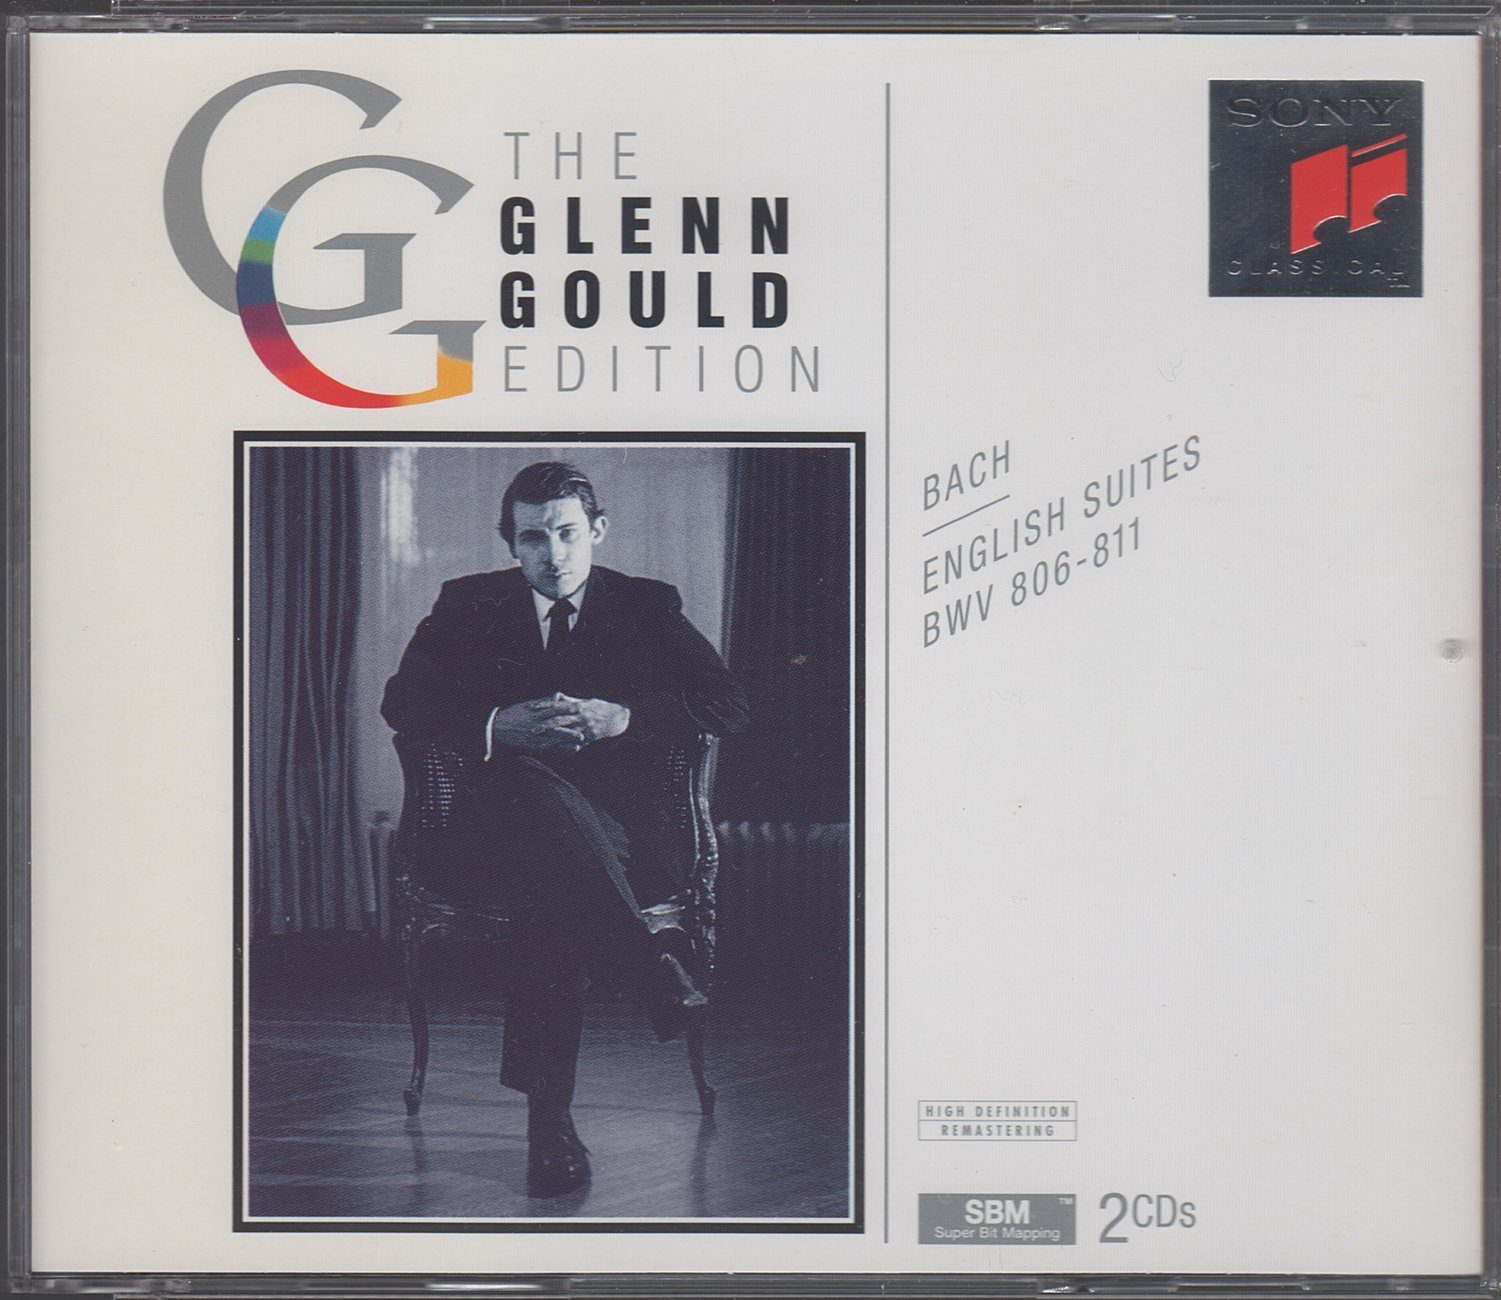 Gould: Bach English Suites BWV 806-811 - Sony SM2K 52506 (2CD set) - Casals  Classical LPs & CDs